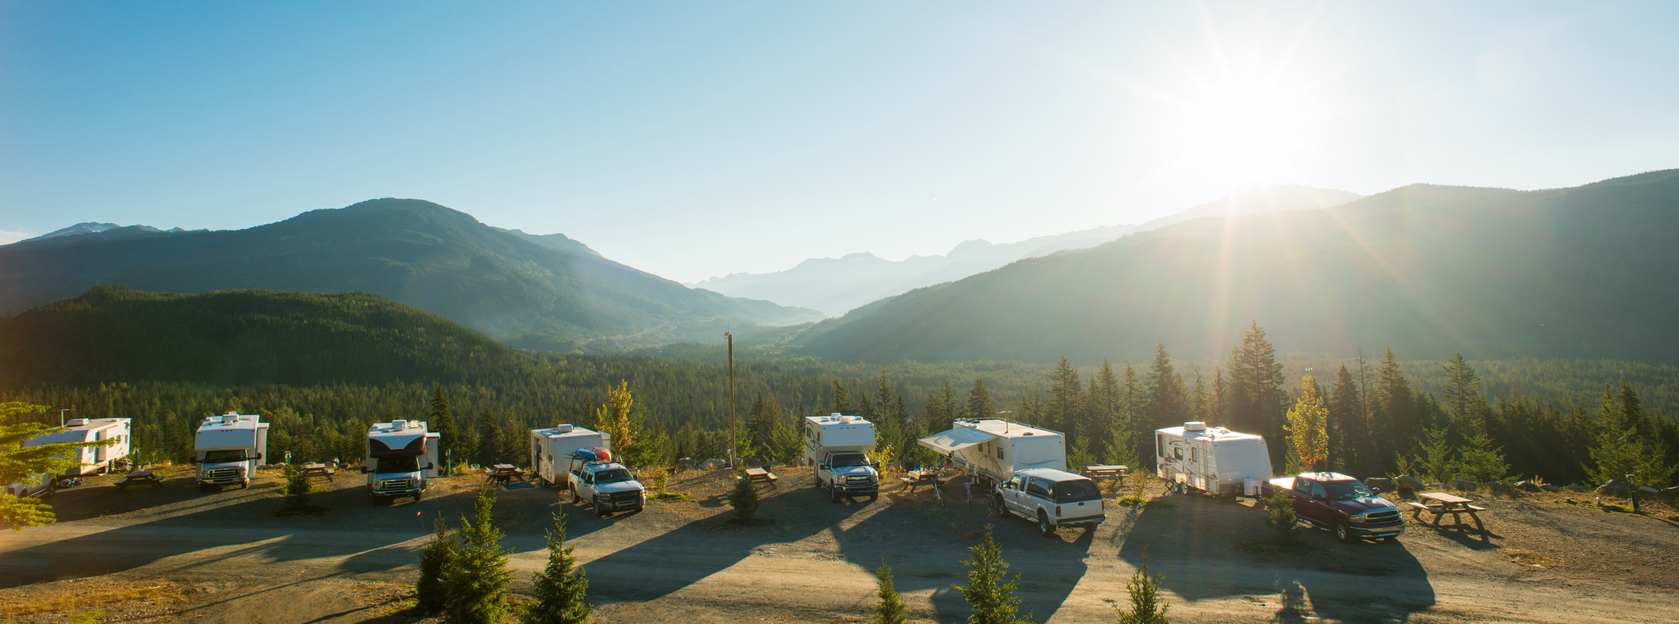 RVs parked at a campsite in the mountains as the sun shines overhead